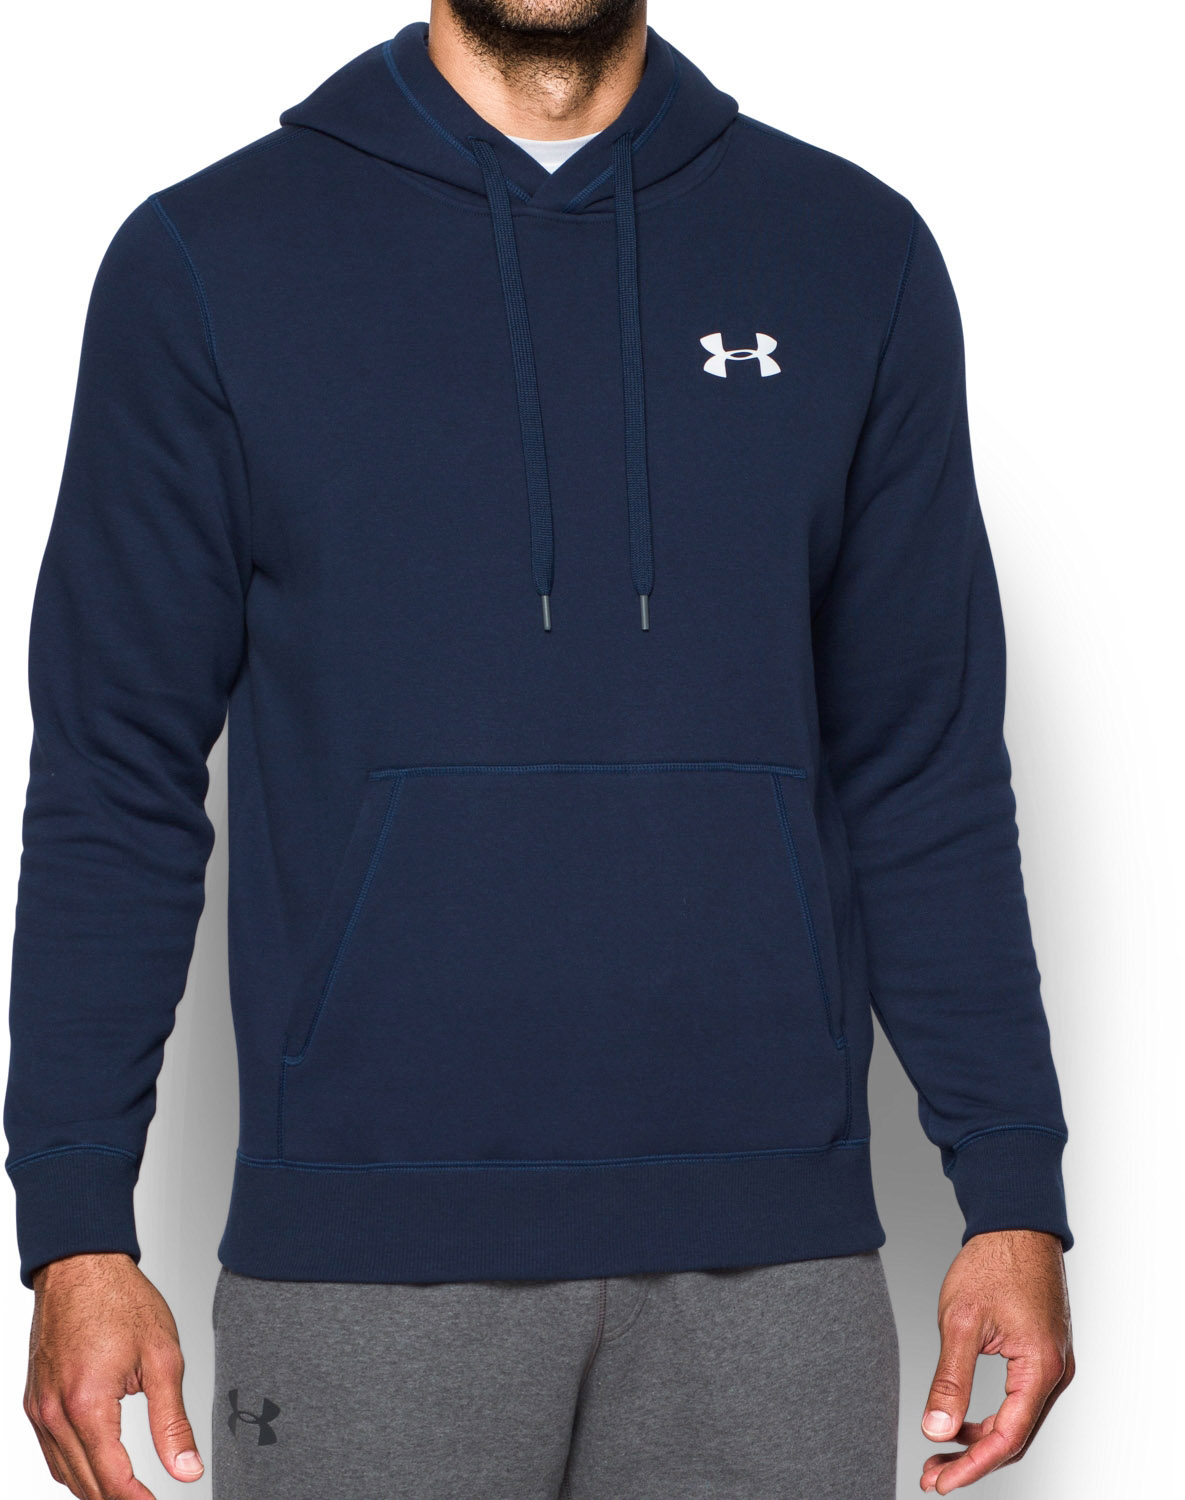 Under Armour - Mens Rival Fitted Pull Over Fleece Top